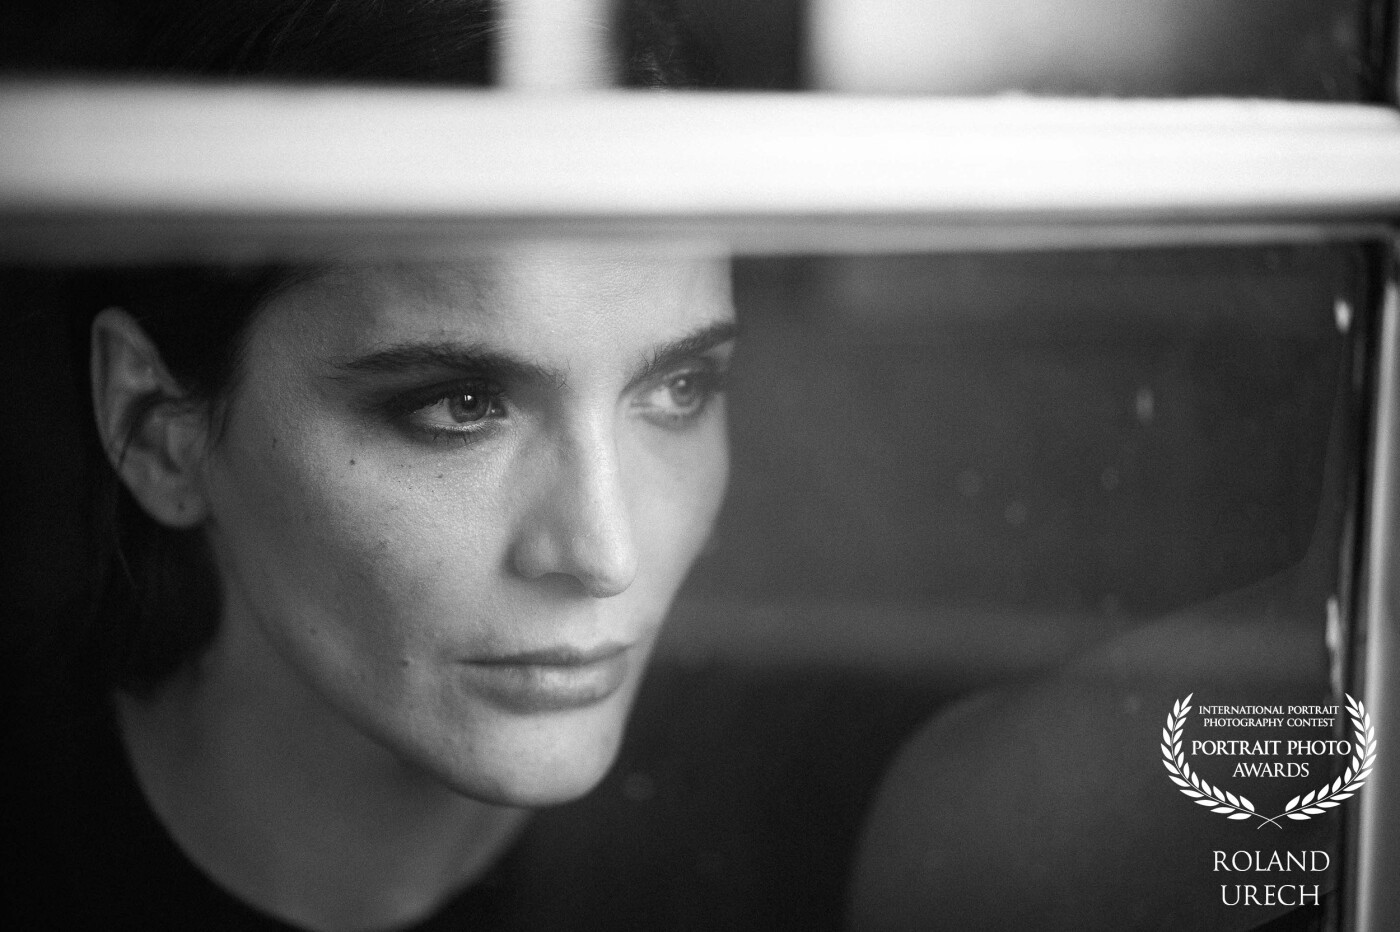 Amazing Pilar at my studio in Lenzburg. Shot through an old window, achieving this lonely mood. Gracias Pilar for this moment and your visit!